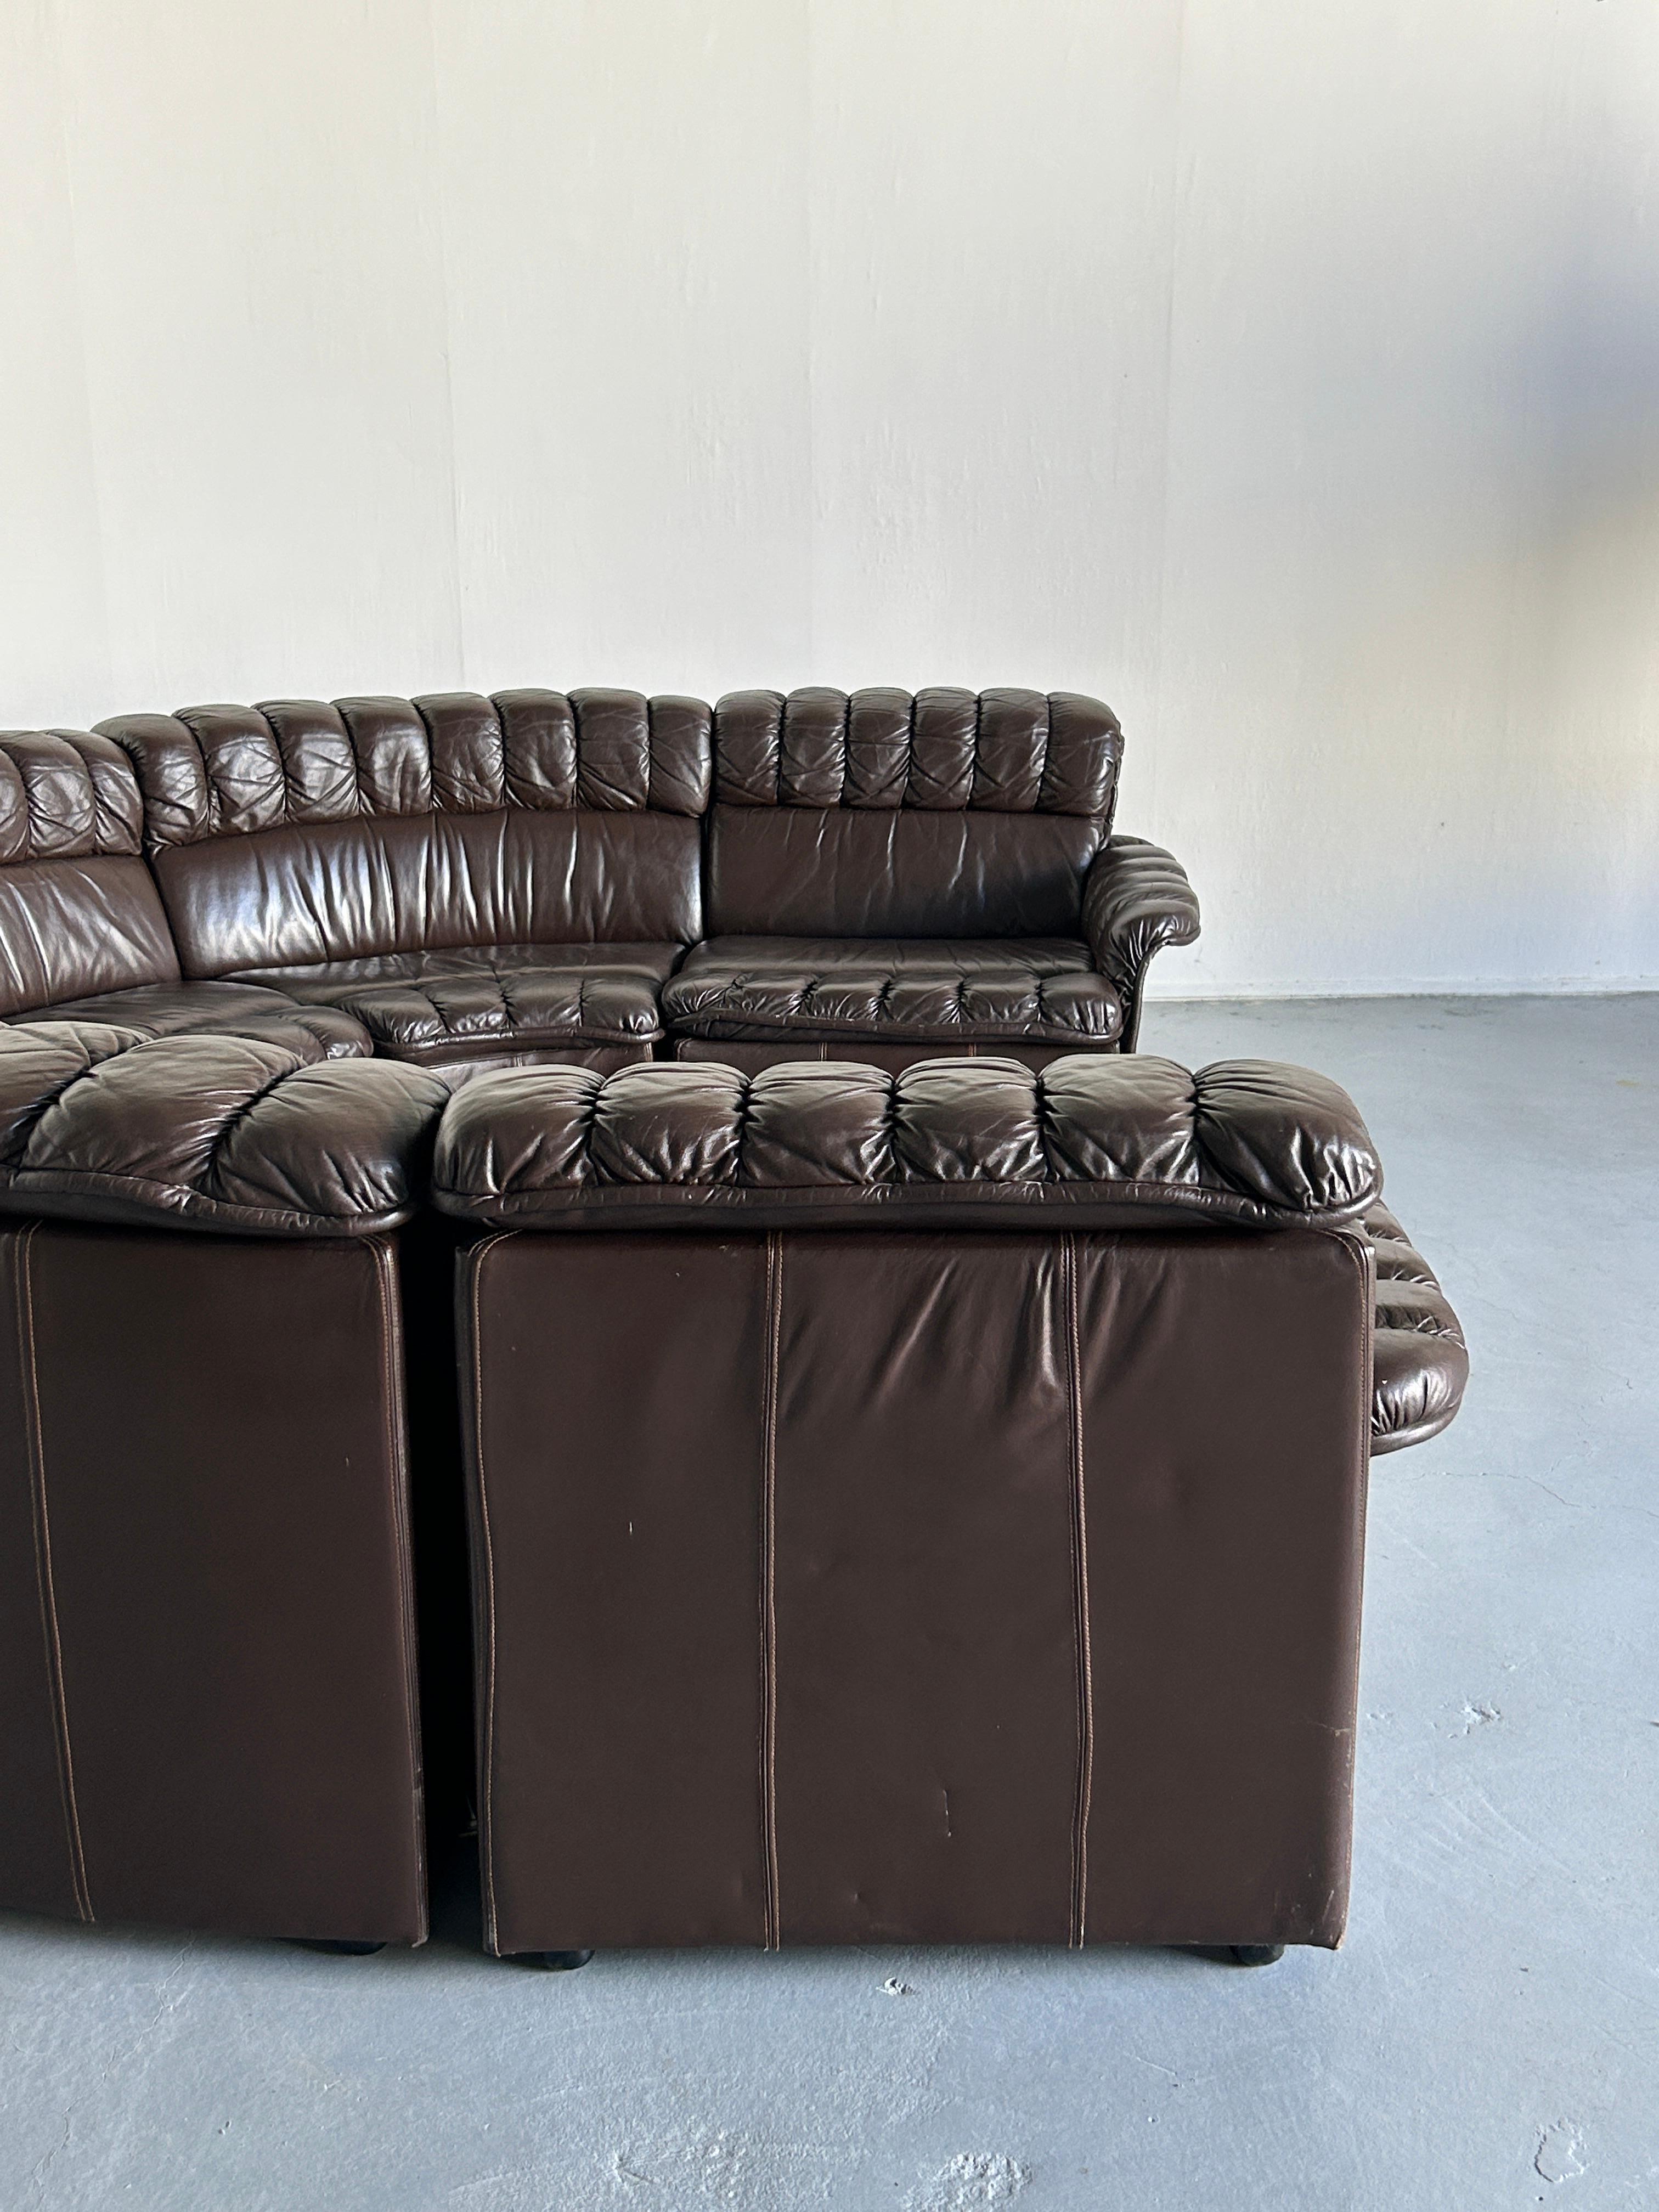 Mid-Century-Modern Leather Snake Sofa in style of De Sede DS-600 Non-Stop, 1970s For Sale 5